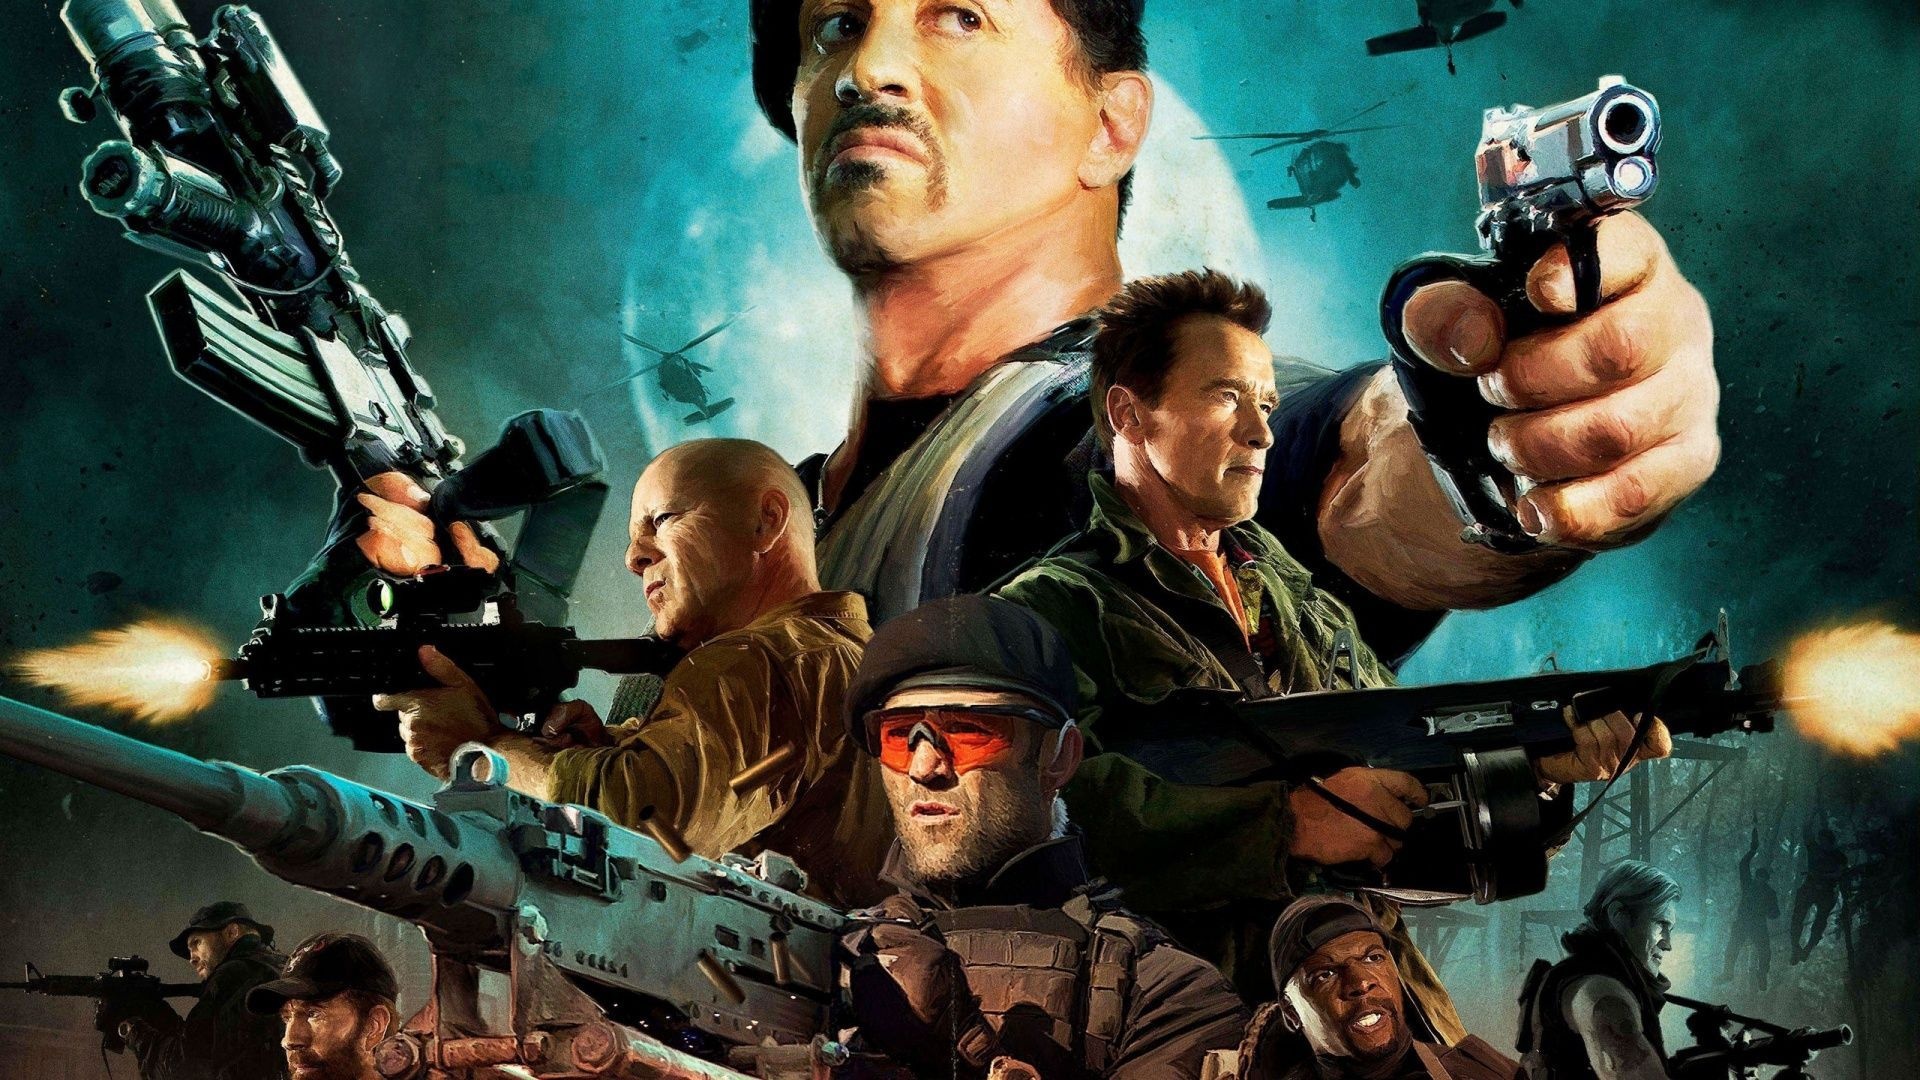 The Expendables 2, Skull wallpapers, Intense action, Edgy design, 1920x1080 Full HD Desktop